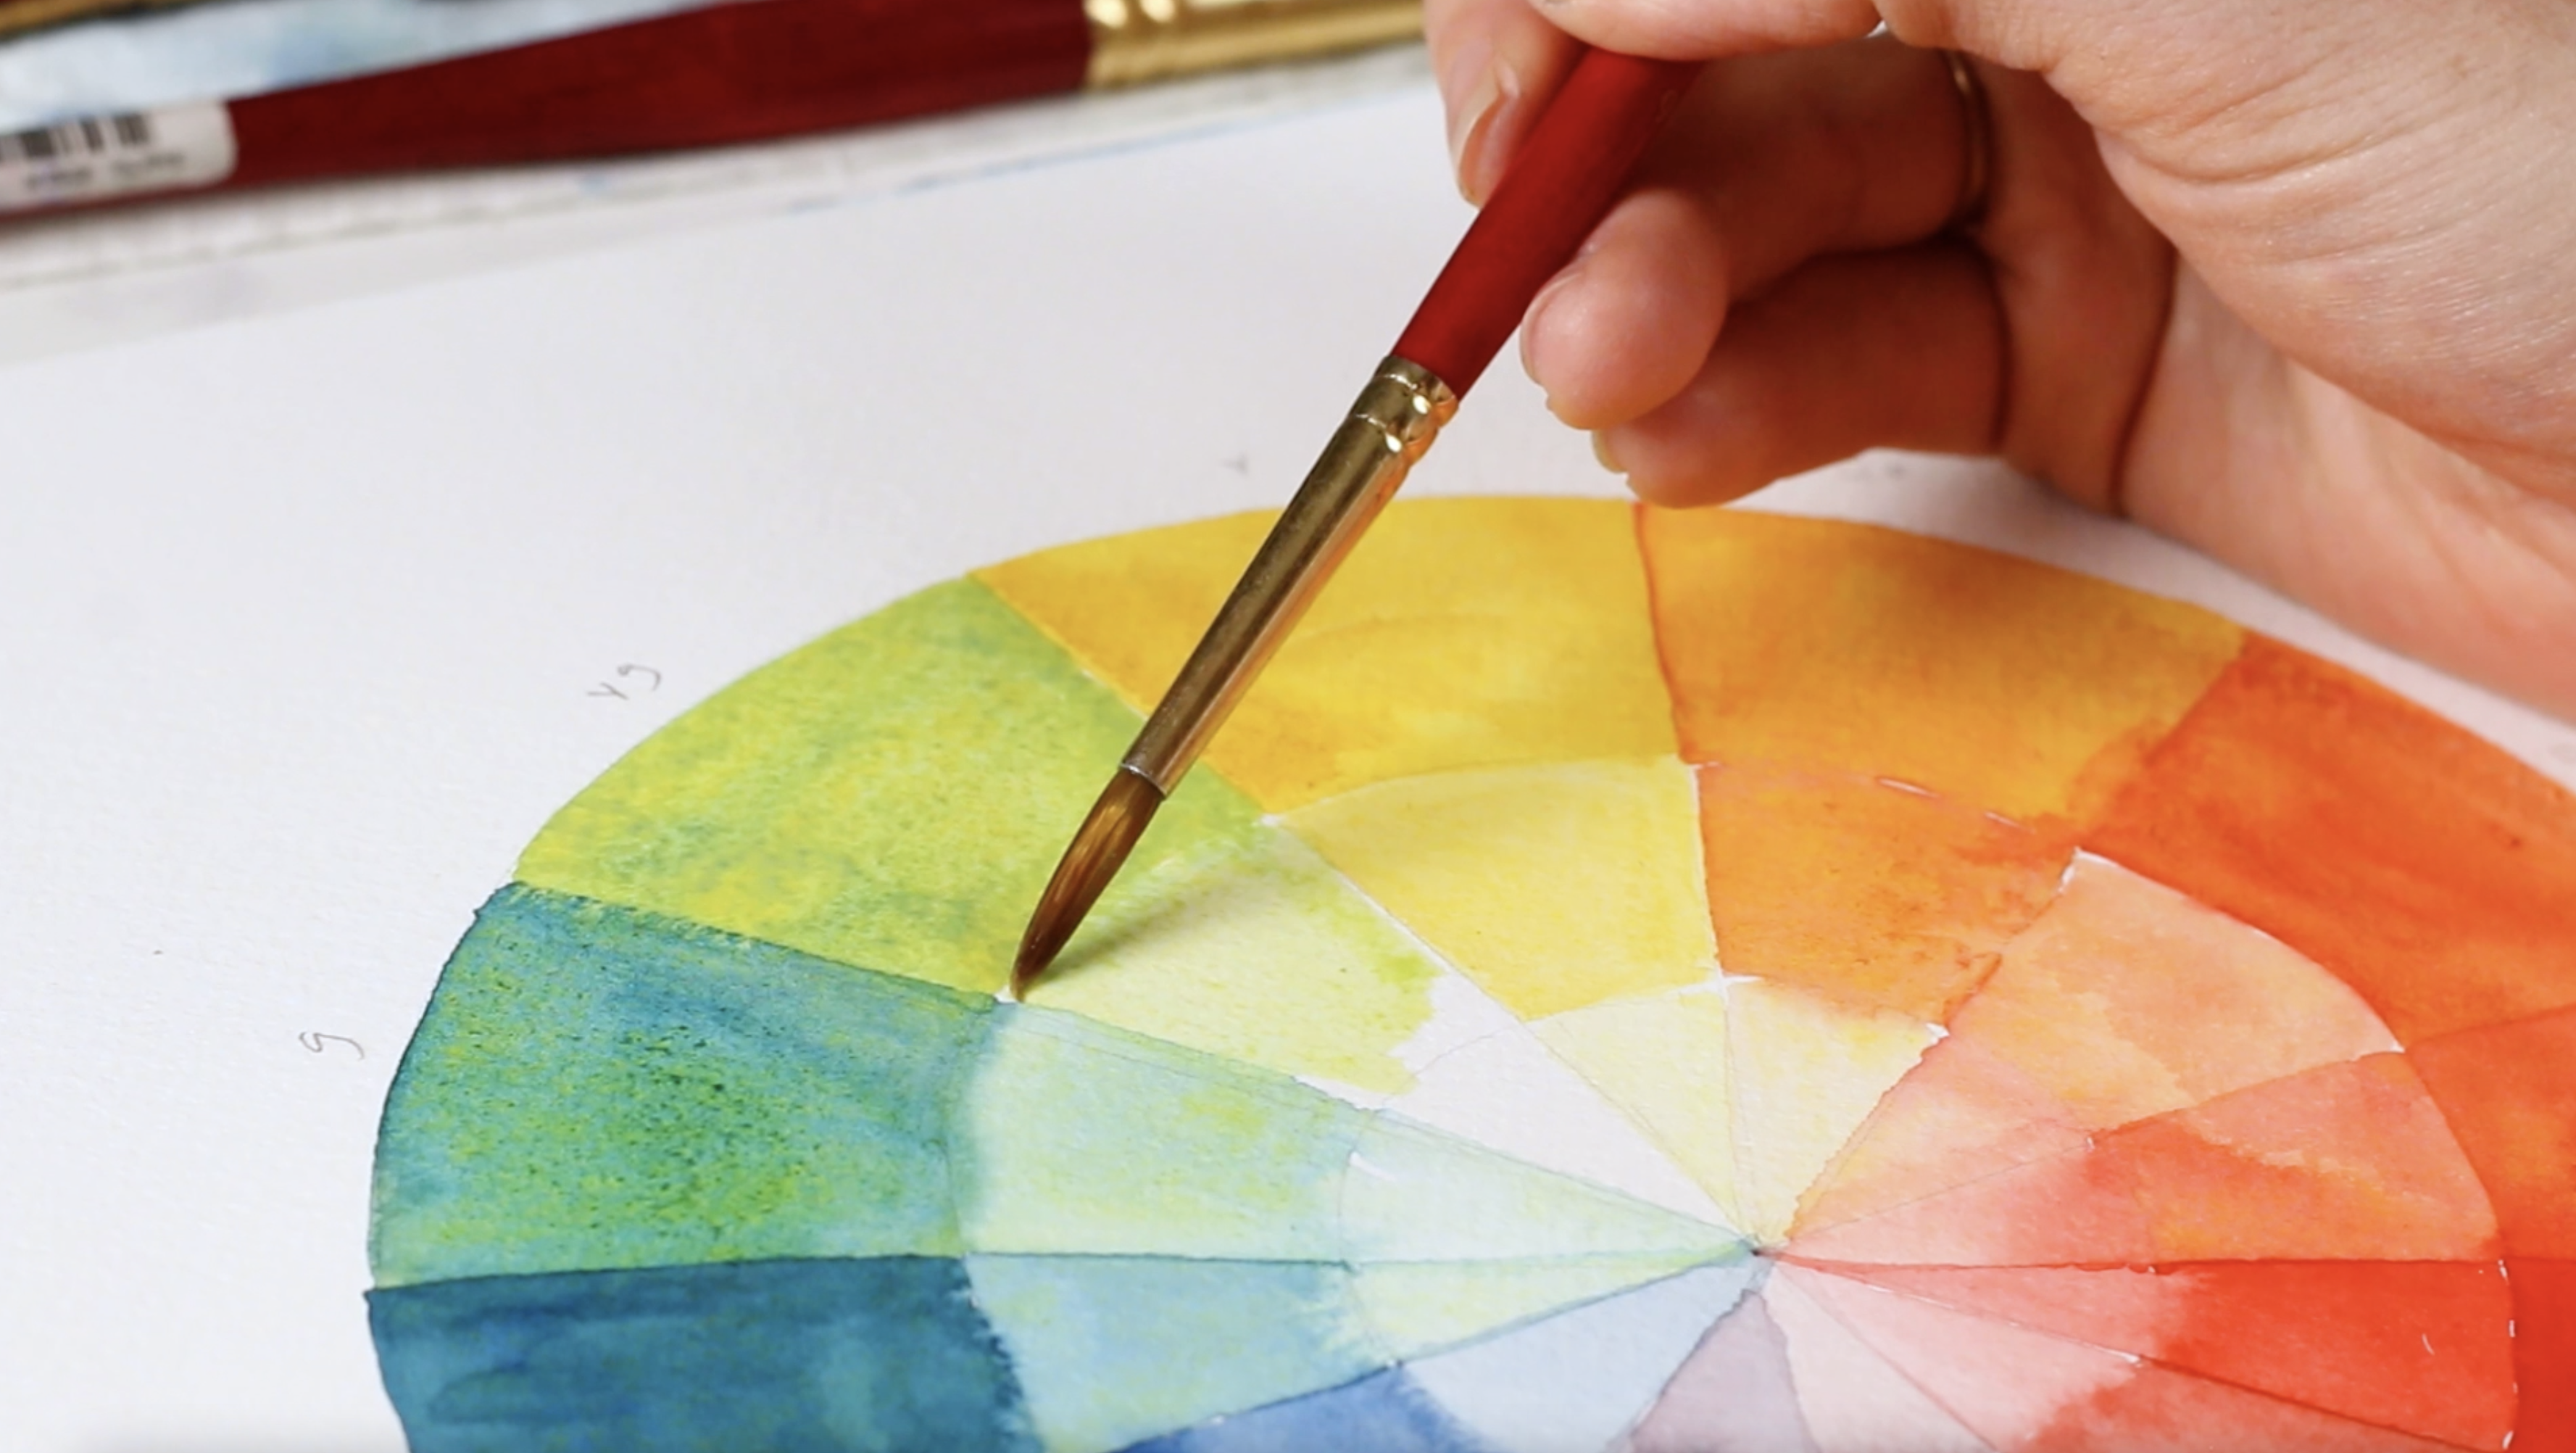 How to Paint (and Use) a Color Wheel